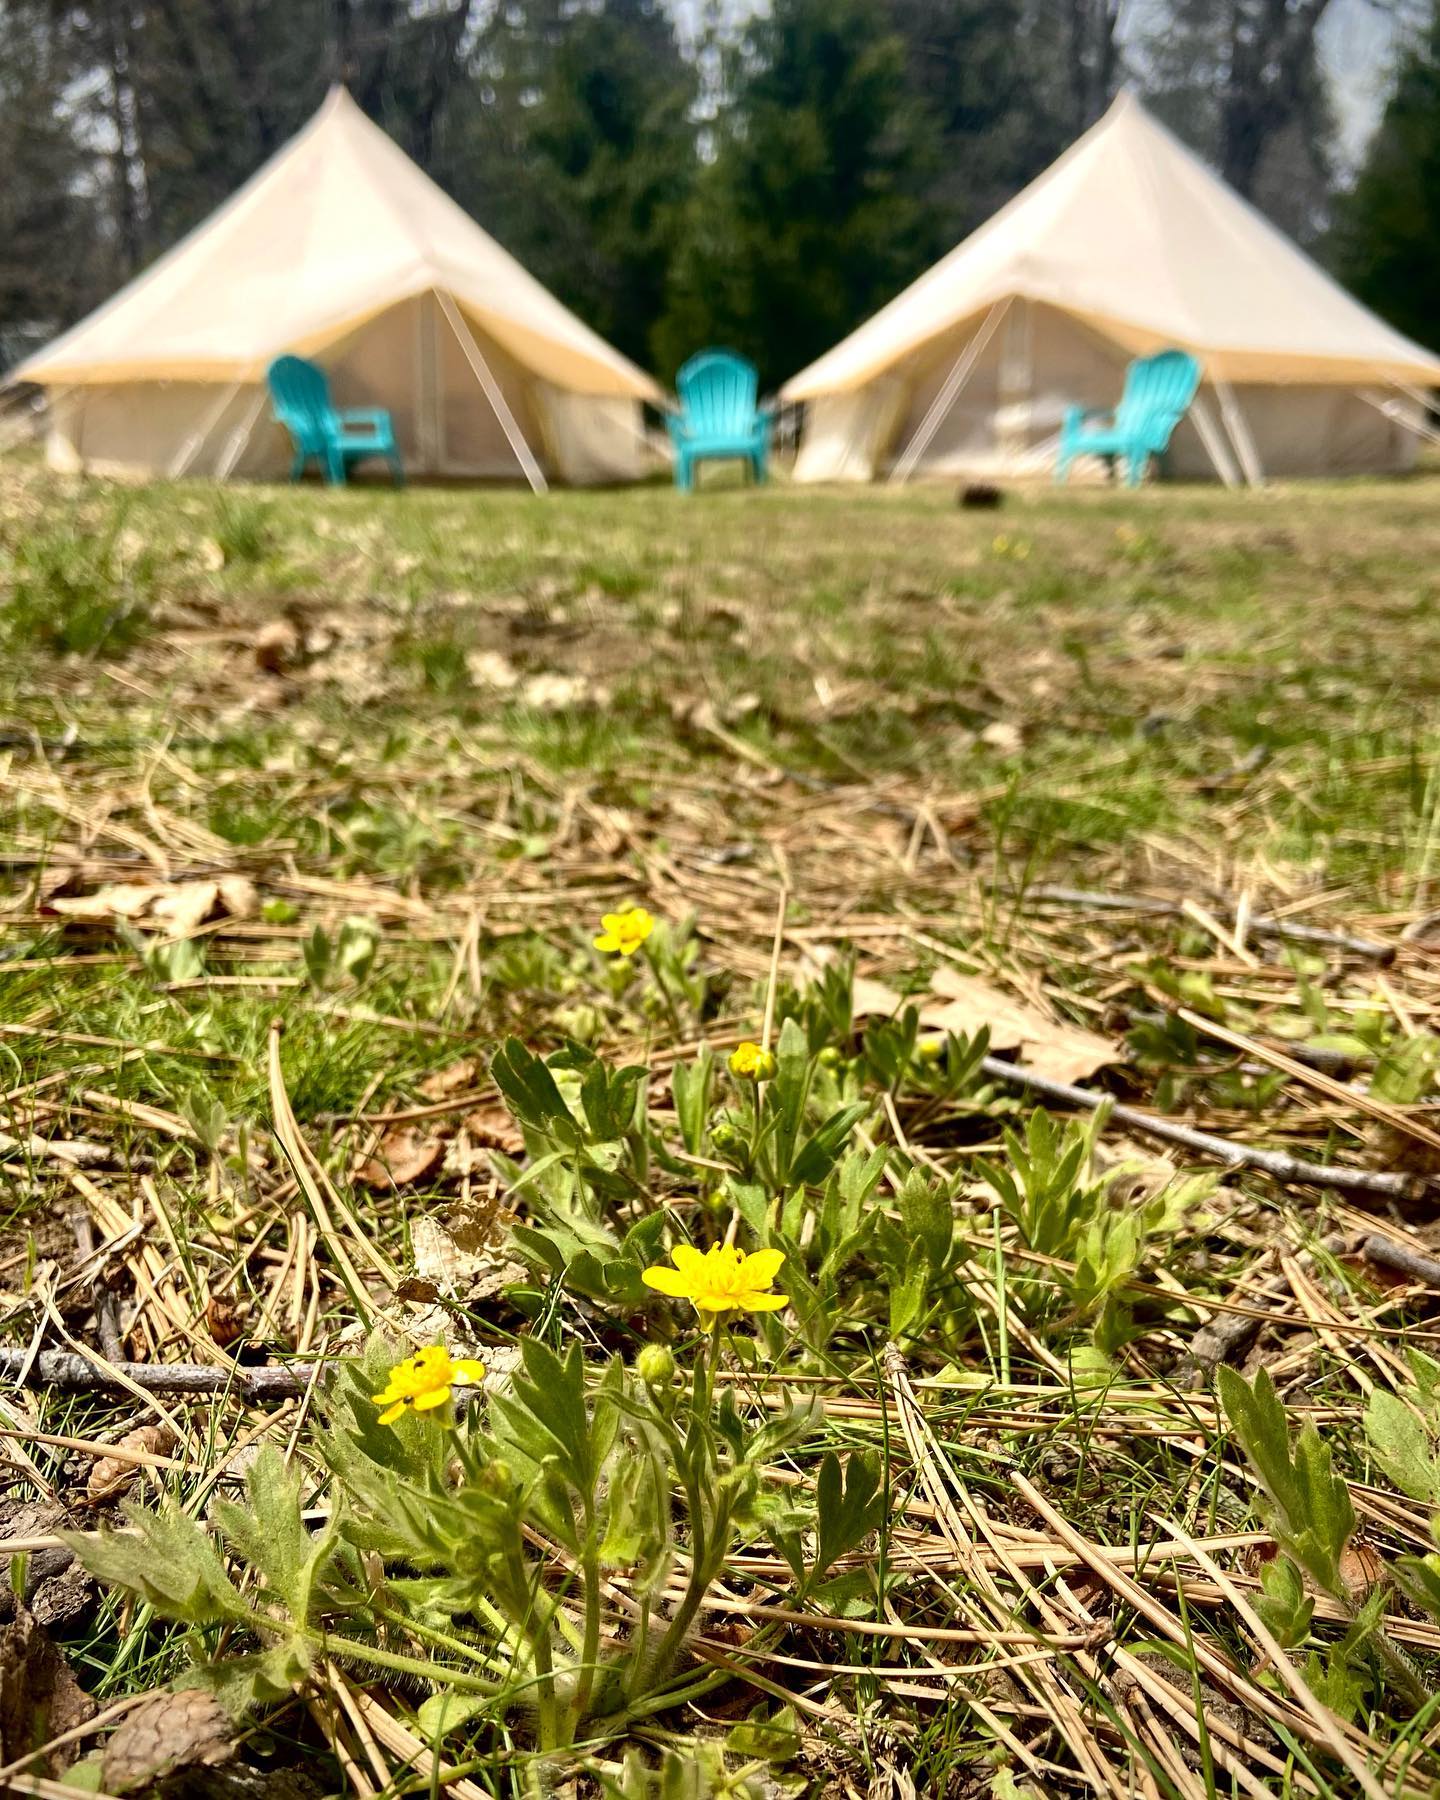 Glamping Yurt and Spring Flowers